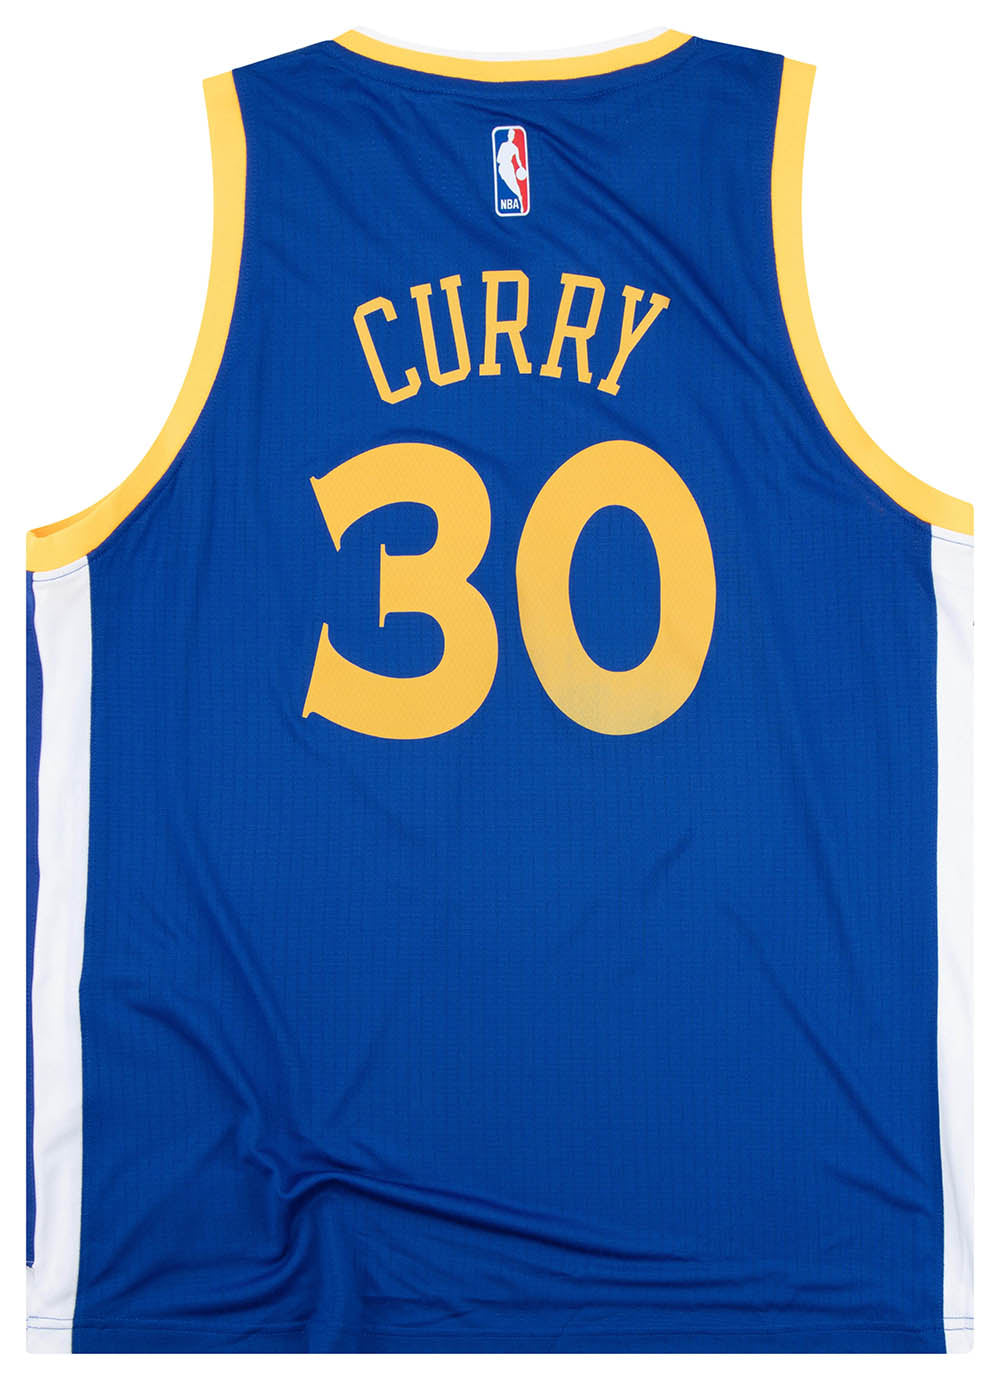 2014-17 GOLDEN STATE WARRIORS CURRY #30 ADIDAS SWINGMAN JERSEY (HOME) -  Classic American Sports